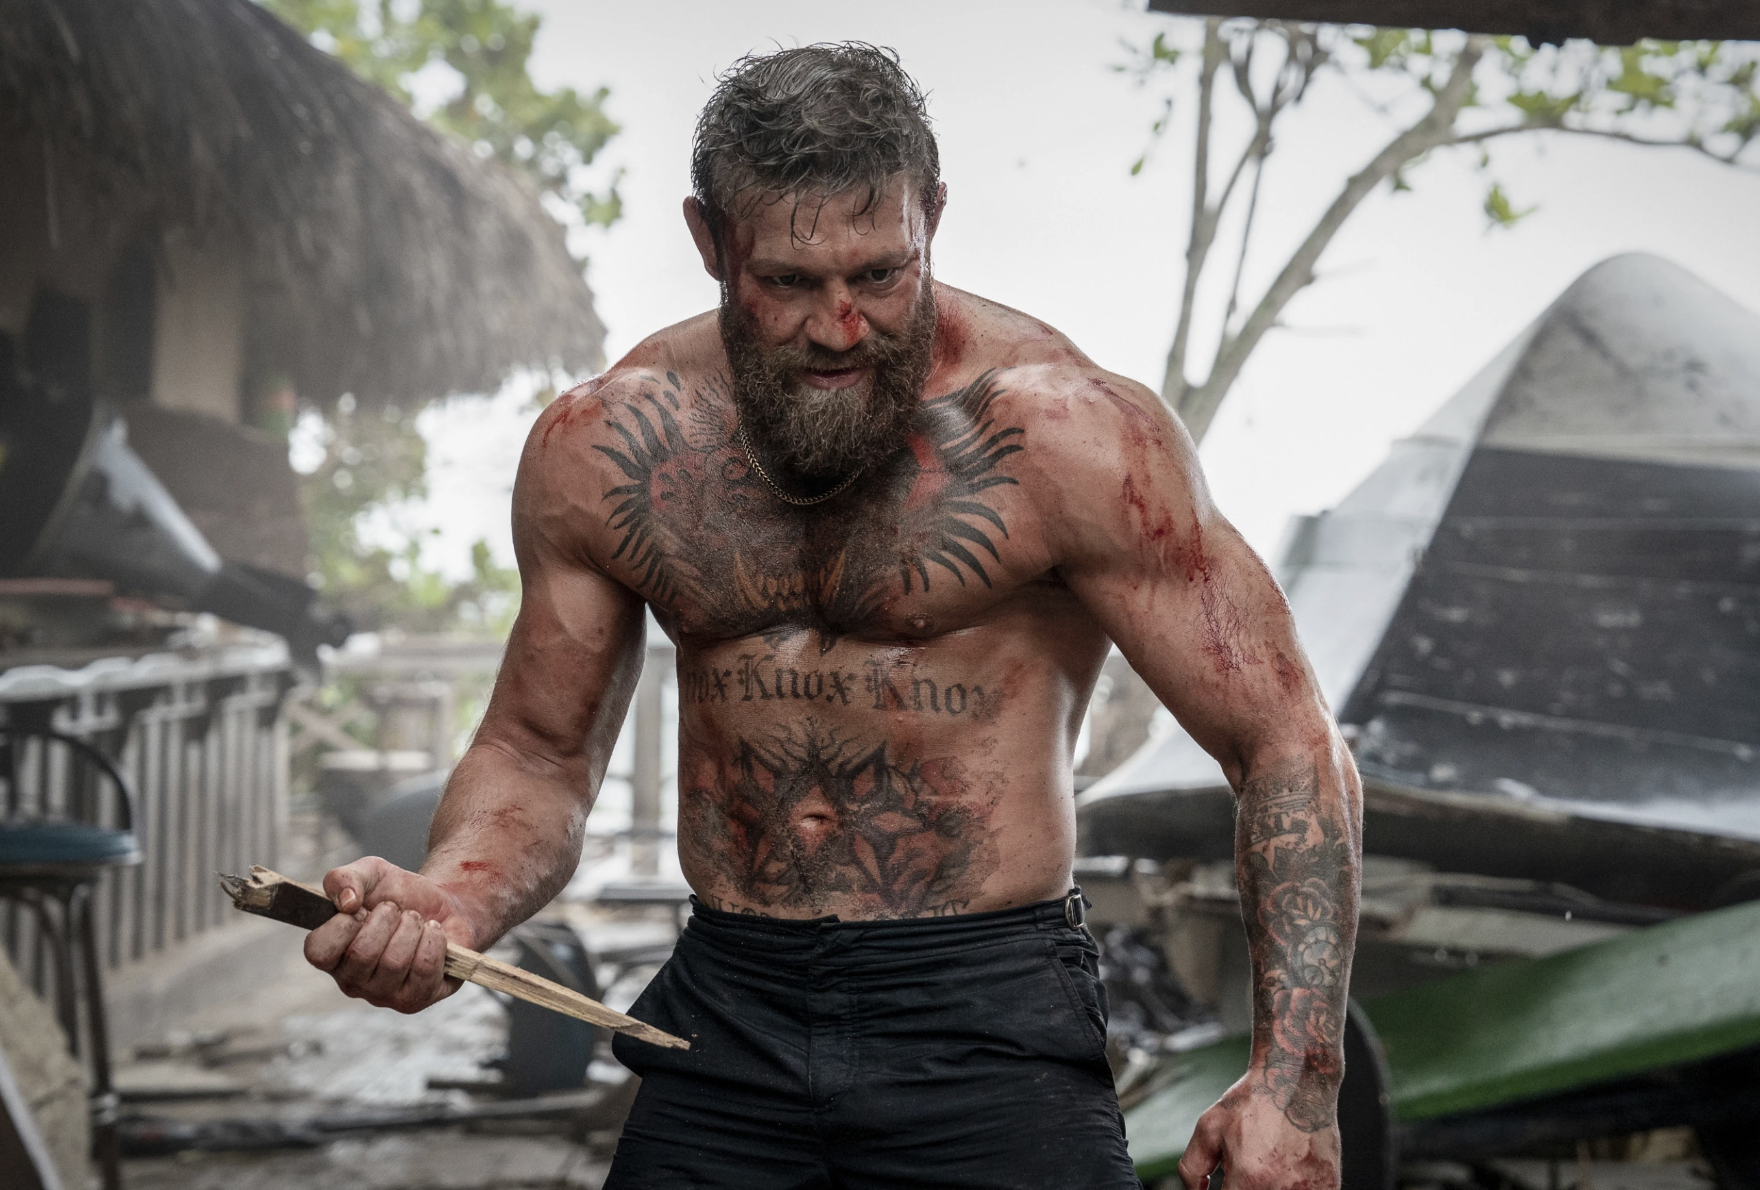 A shirtless and very muscular bearded man stands poised to fight, clutching a dagger.